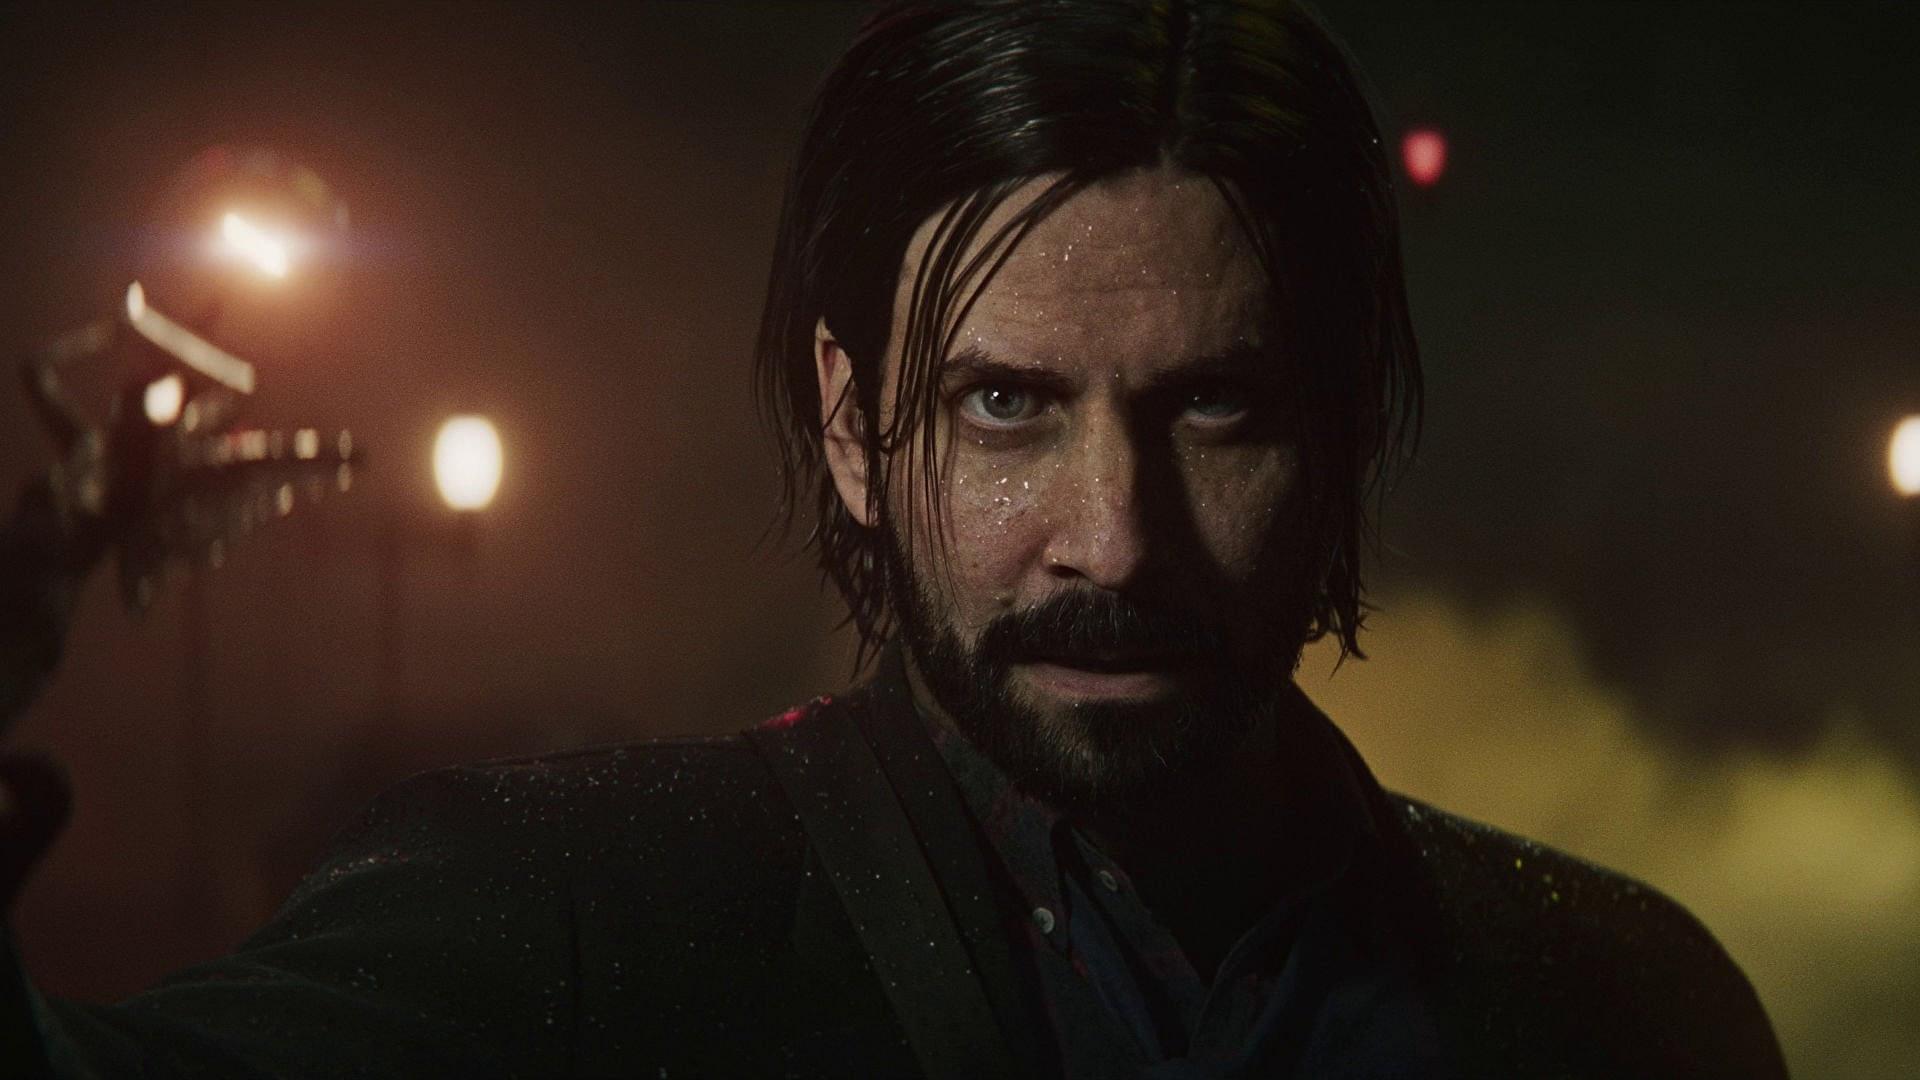 Alan Wake in a live-action footage from Alan Wake 2